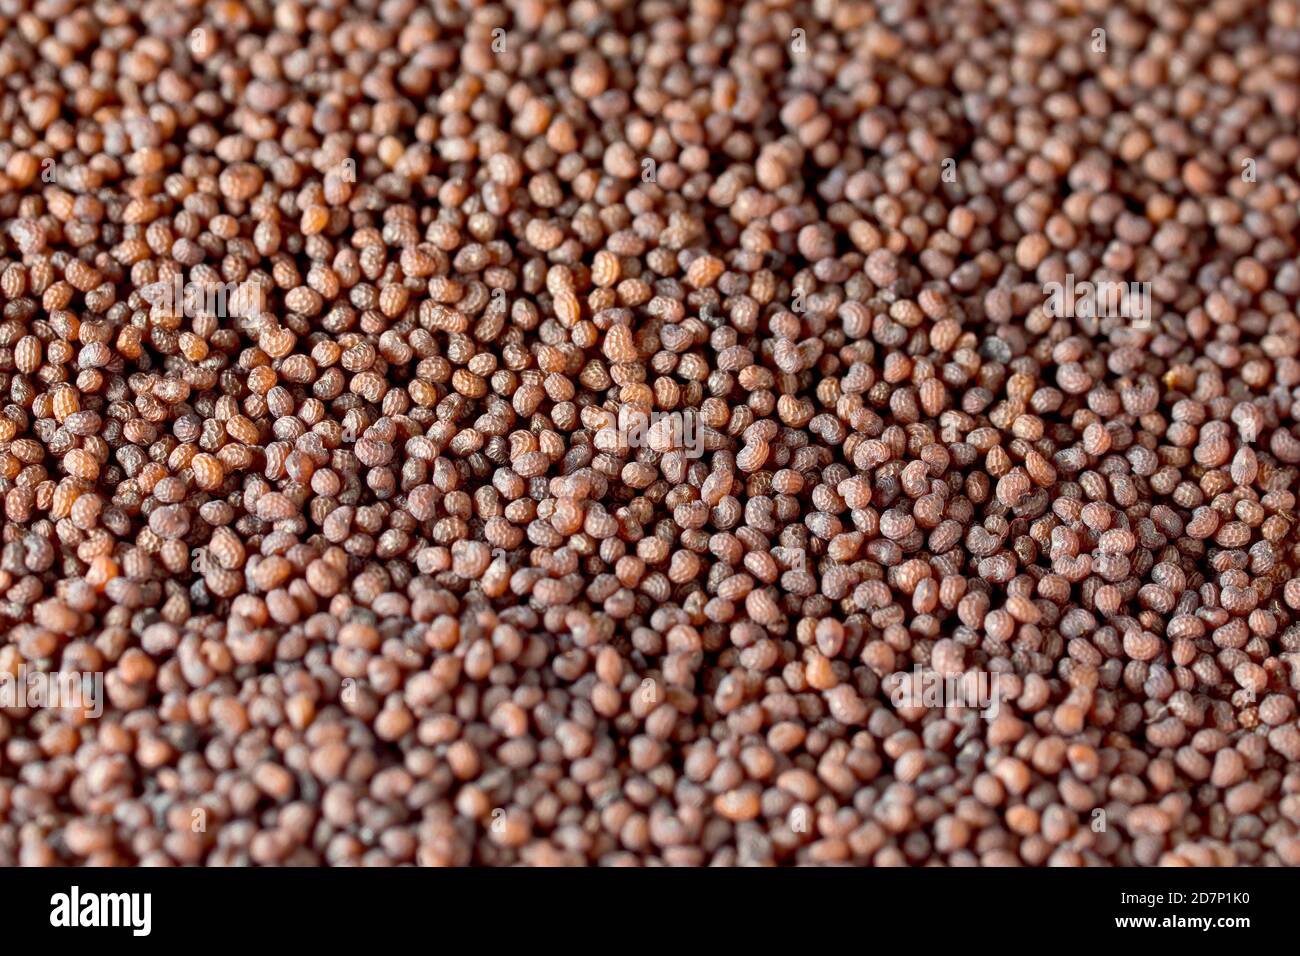 Close up showing a mass of seeds collected from the Long-headed Poppy (papaver dubium). Stock Photo